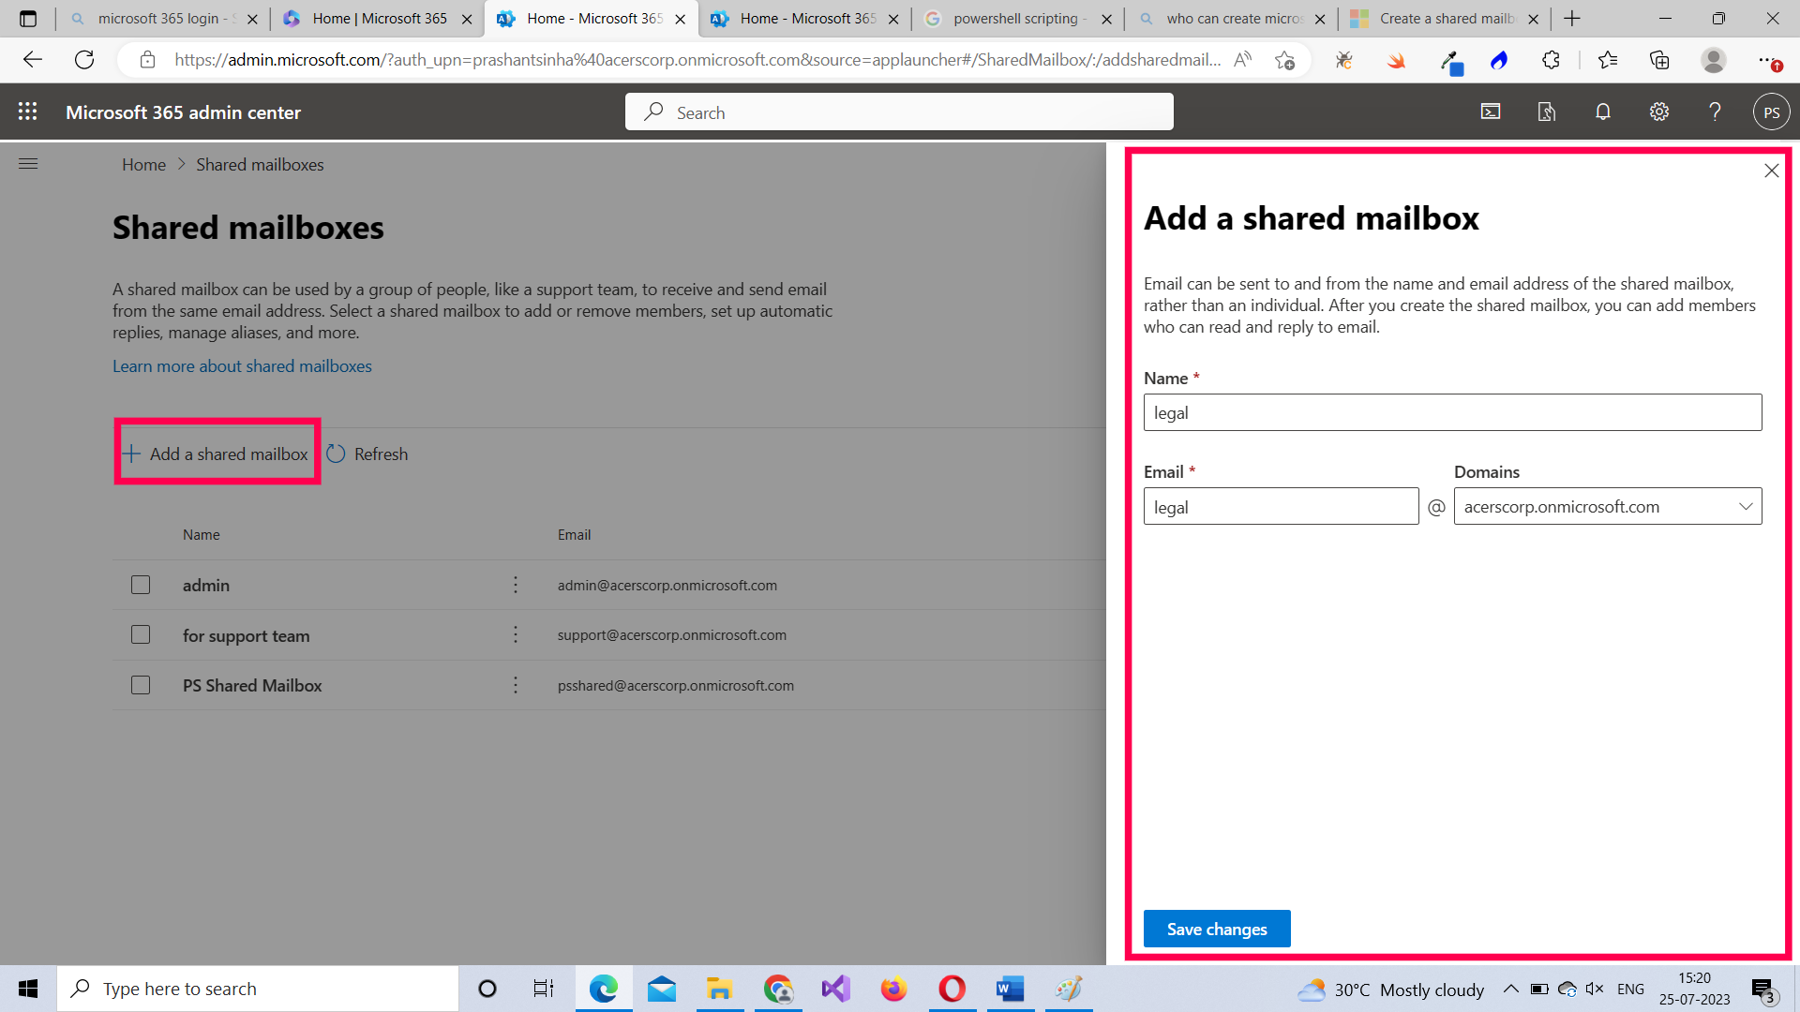 This screenshot shows how you can add a shared mailbox using Microsoft 365 admin center by providing the required details like name and email address. 